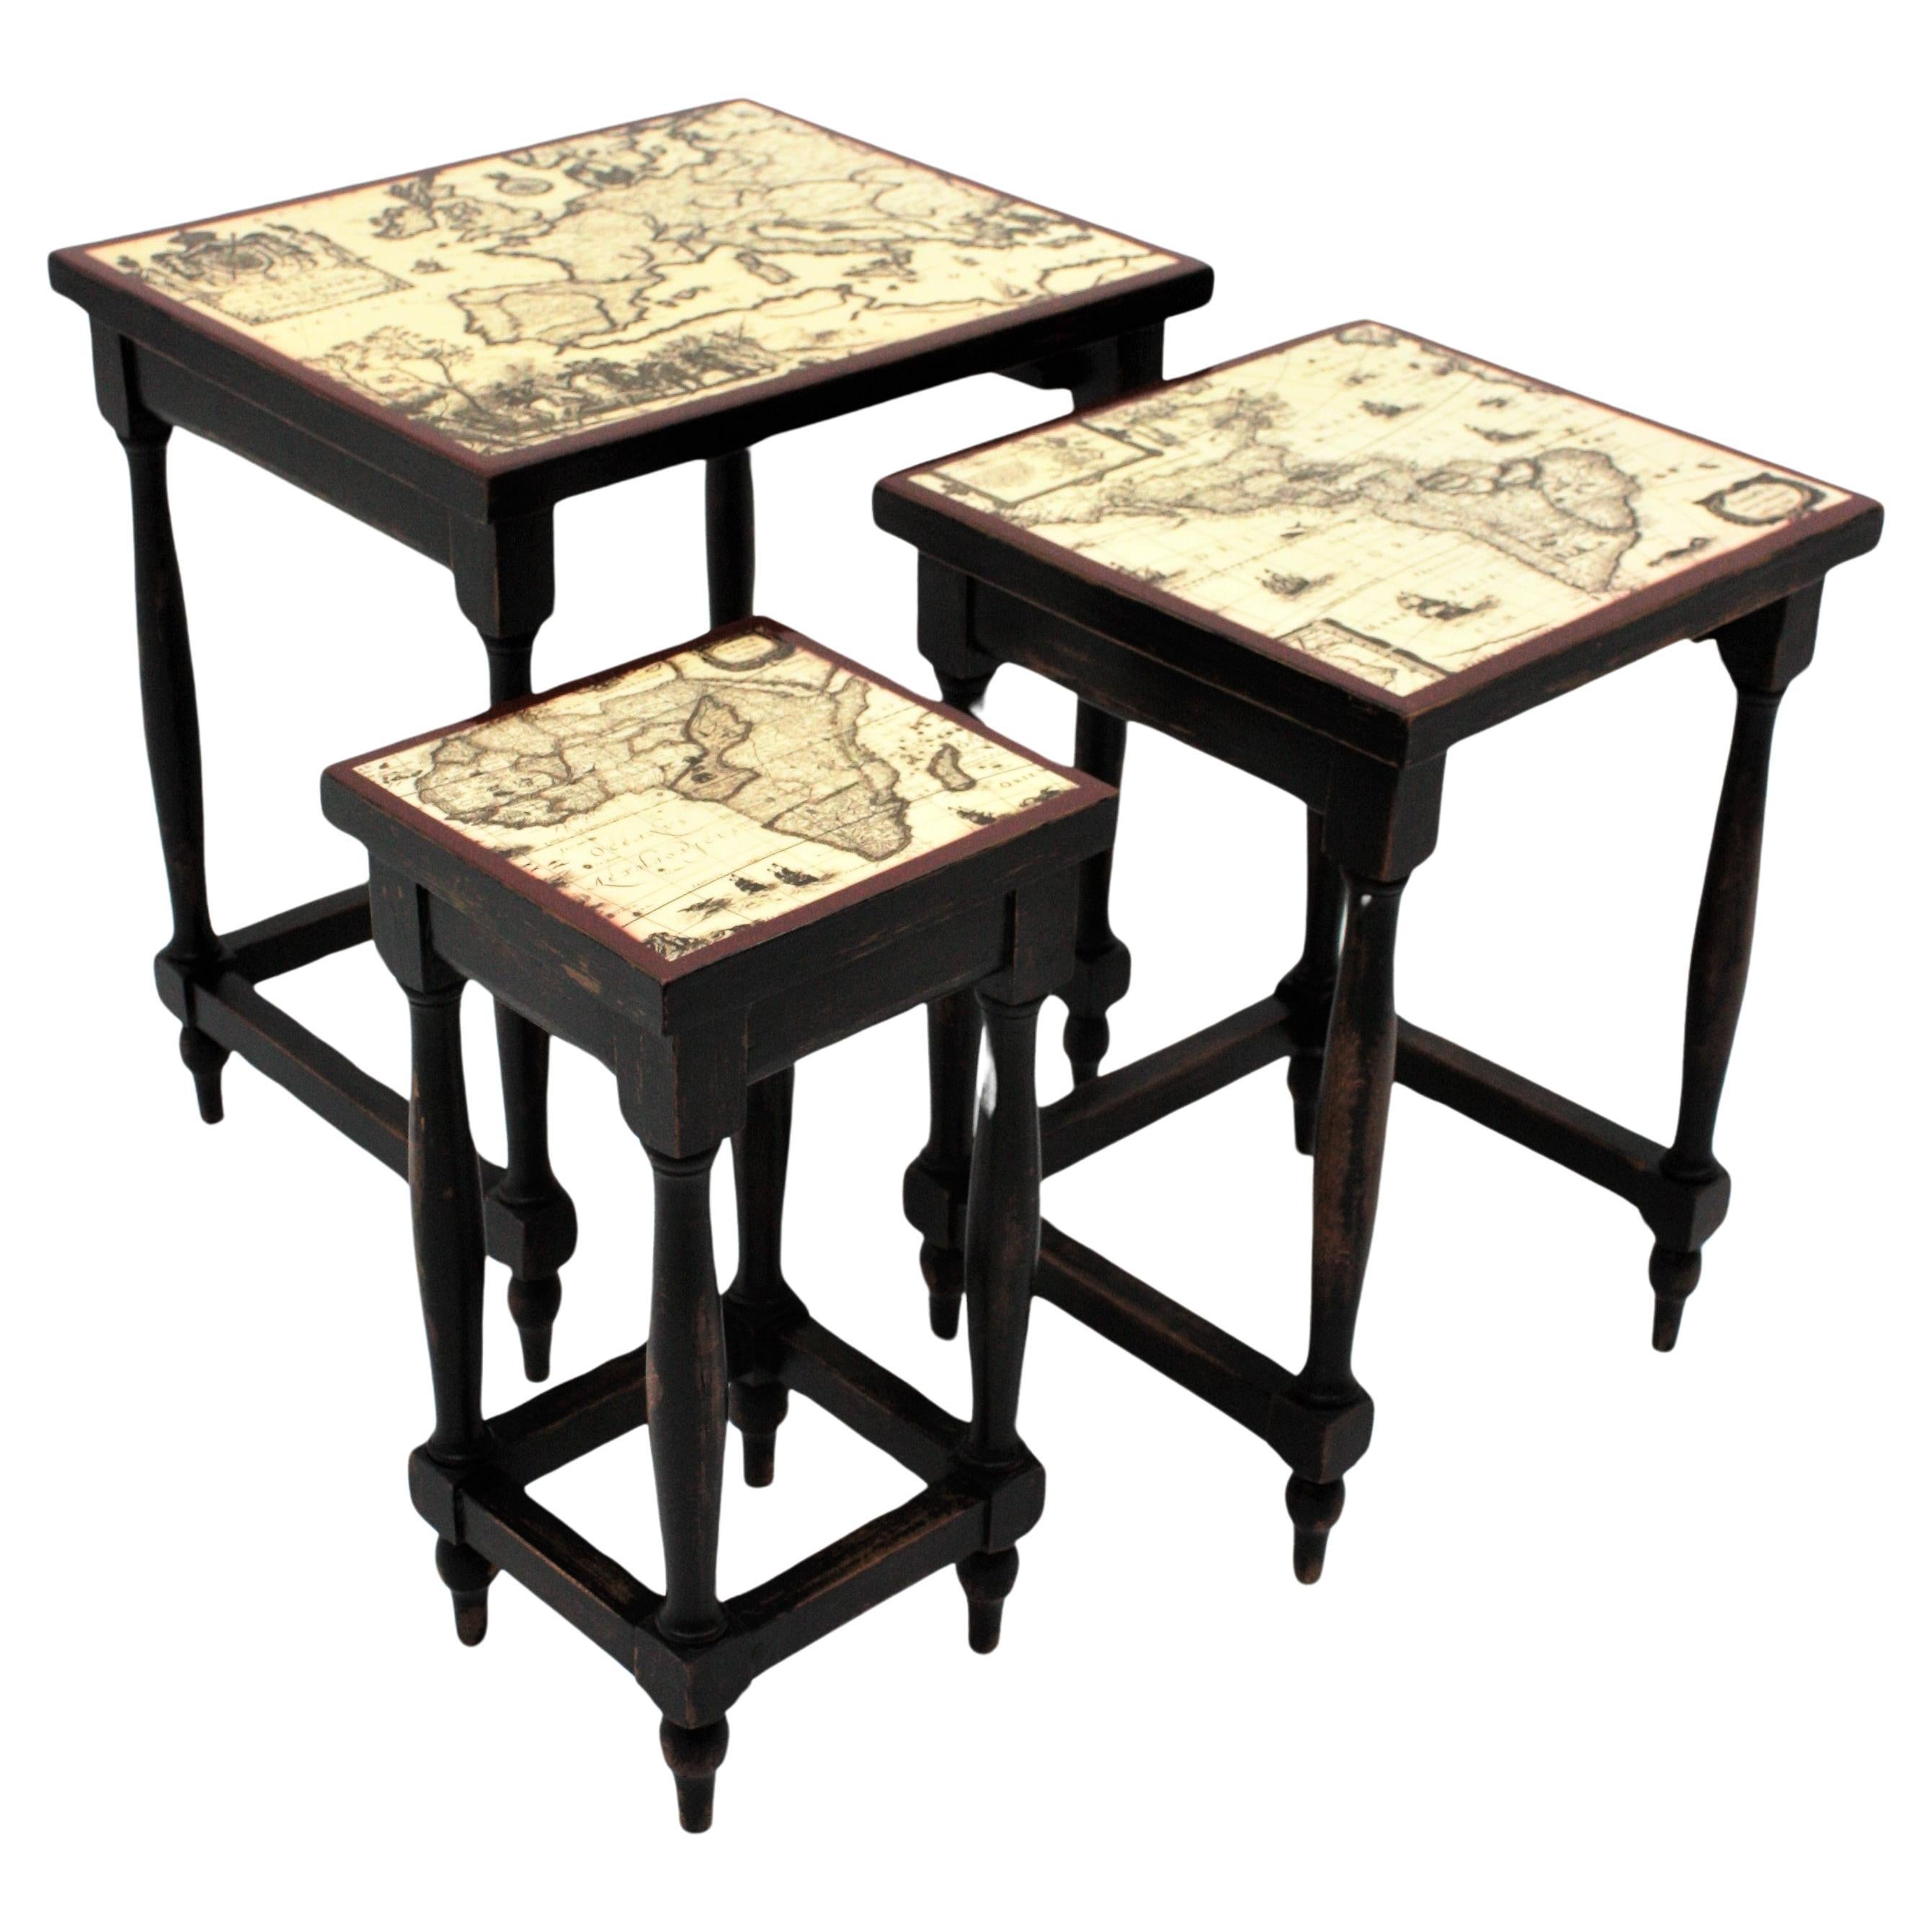 French Nesting Tables in Wood with Maps Tops, 1940s For Sale